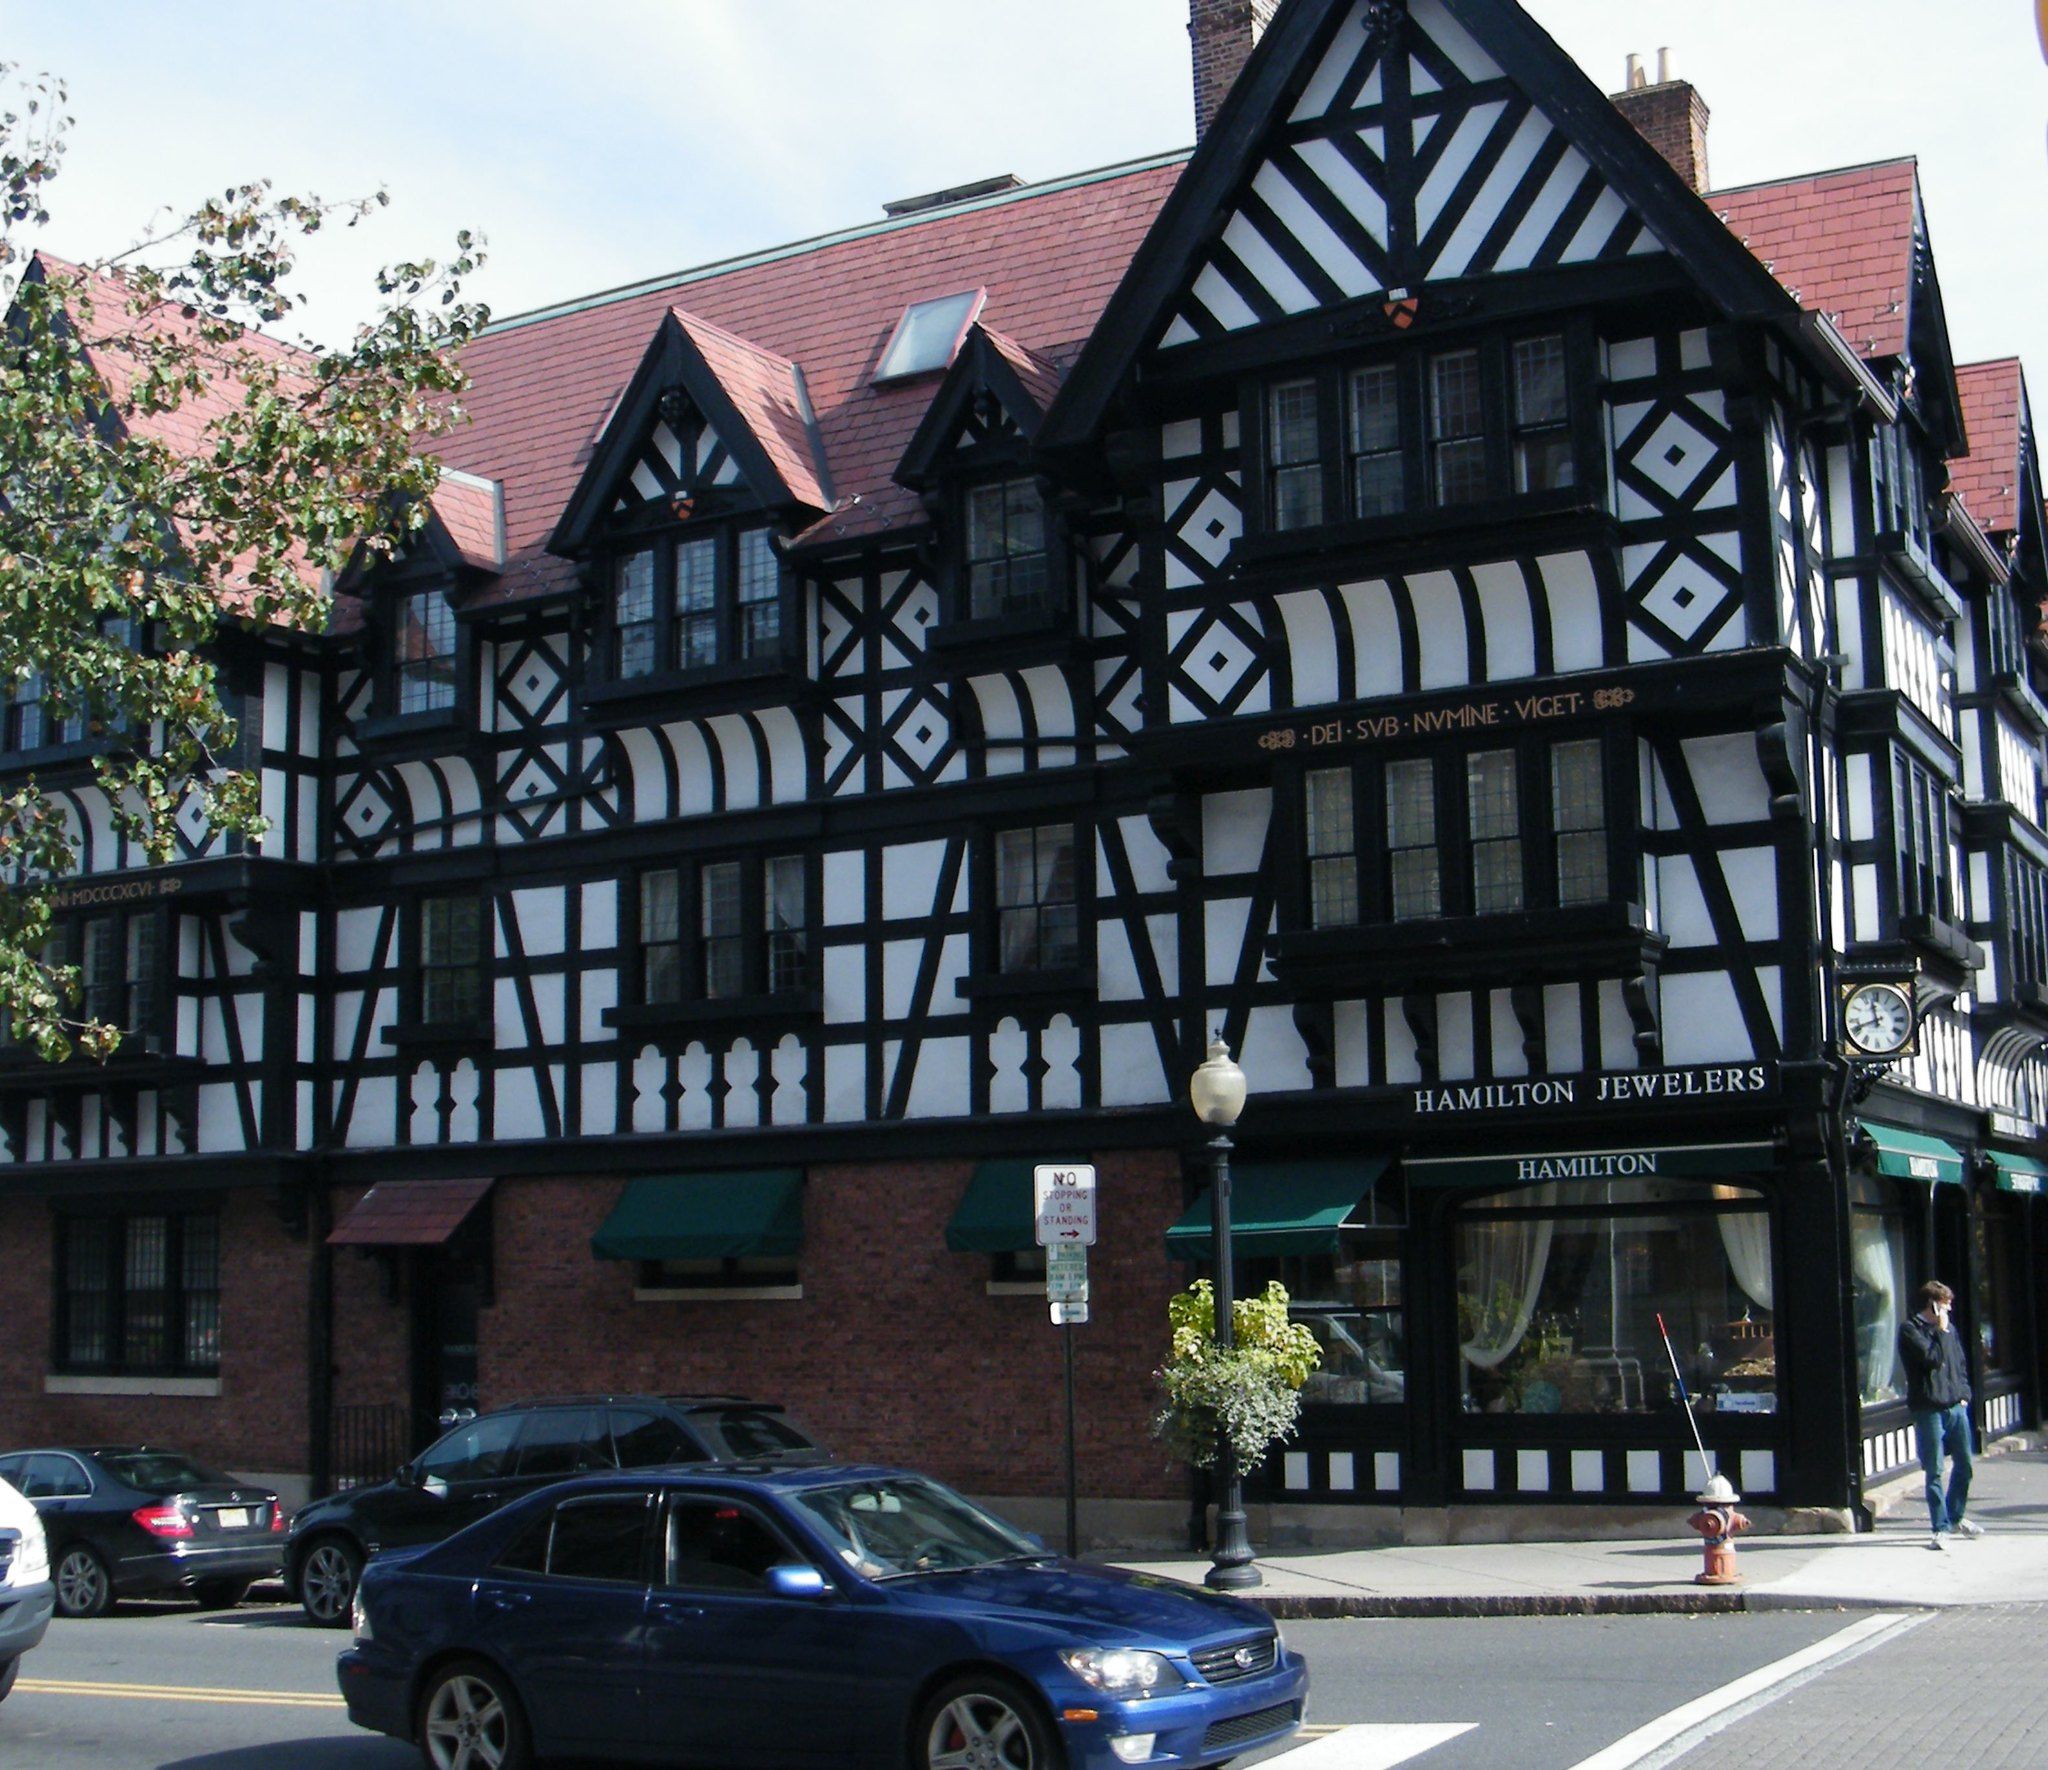 An old building in Princeton, New Jersey